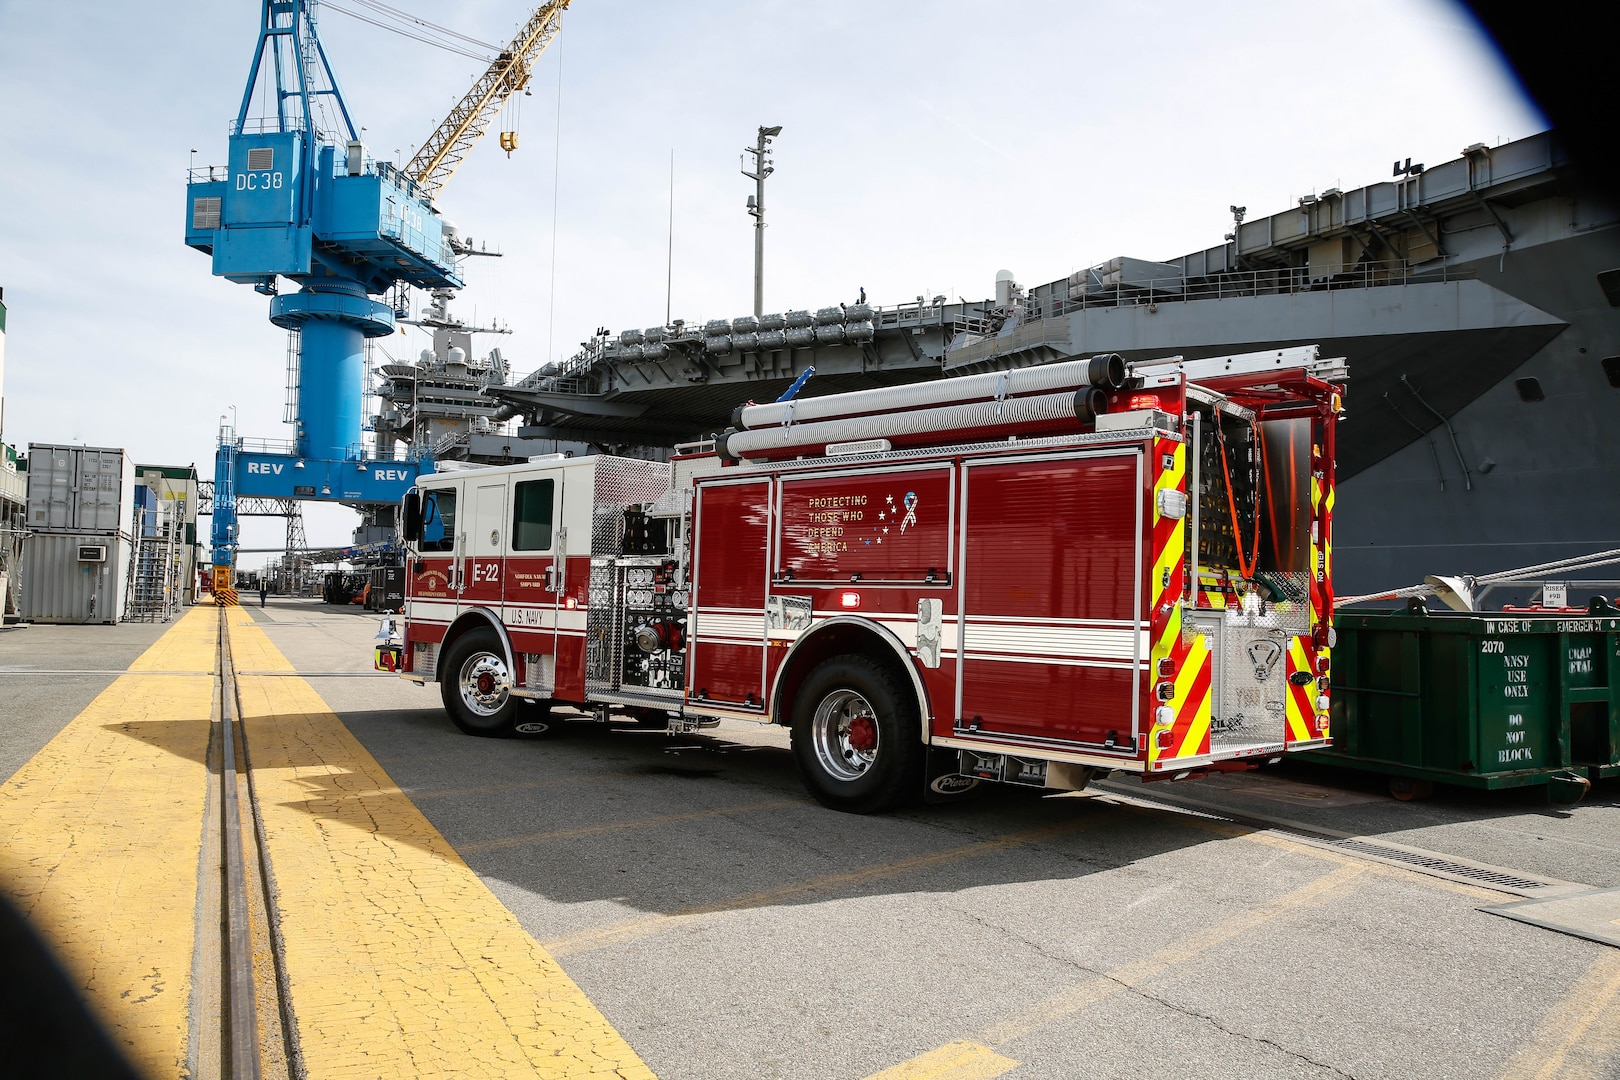 Norfolk Naval Shipyard's Fire Engine 22 with the USS Harry S. Truman (CVN 75) in the background.